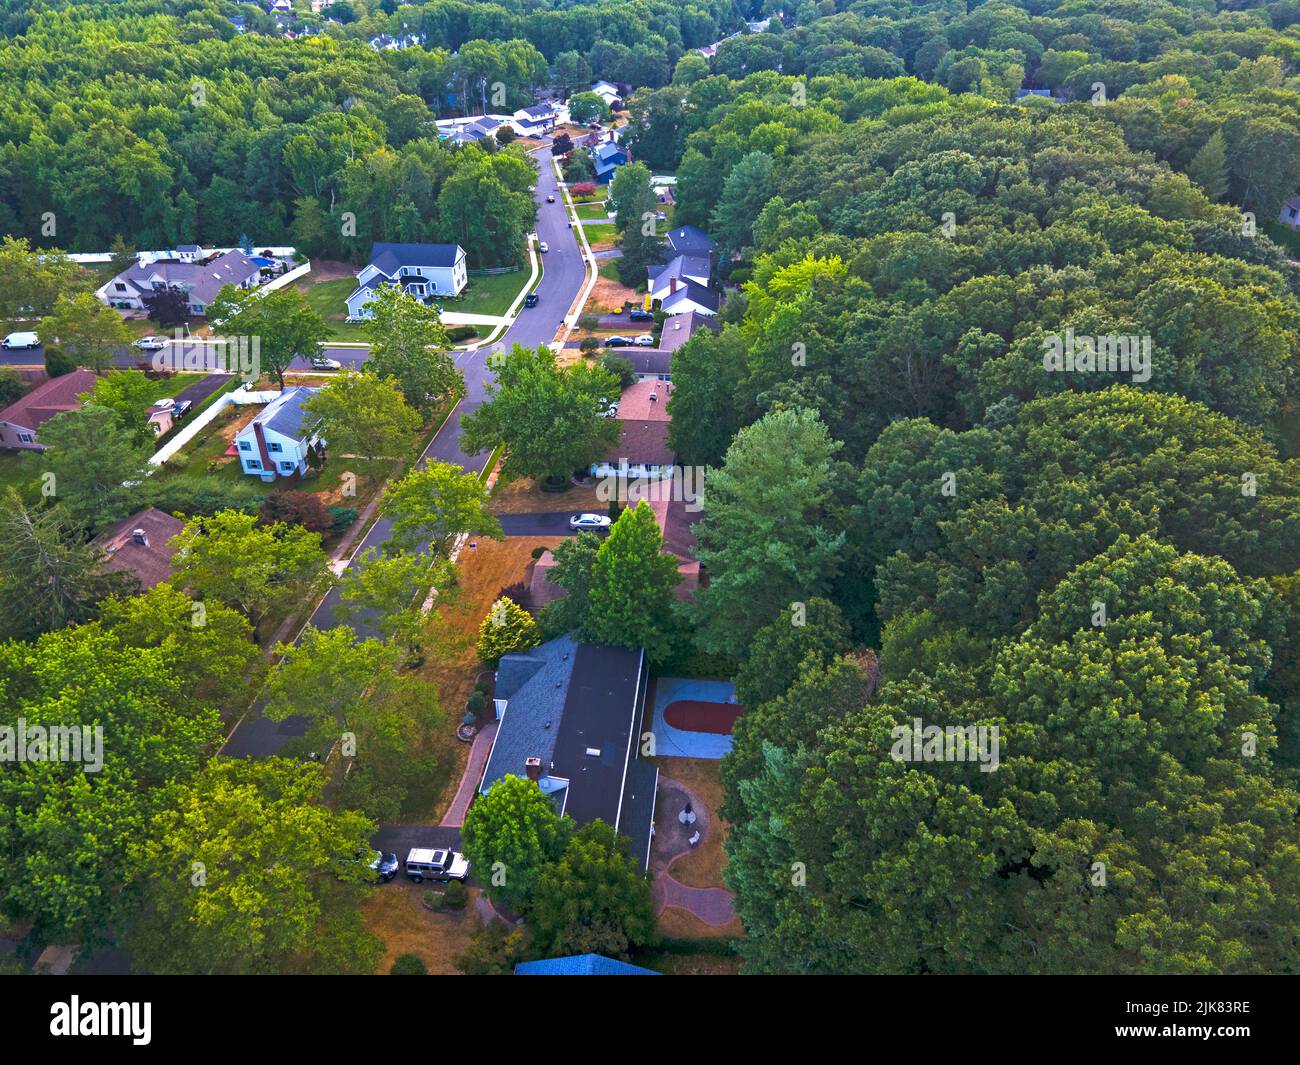 Panoramic aerial view of a section of Old Bridge township from above the tree tops showing brown lawns, the effects of a recent drought -08 Stock Photo